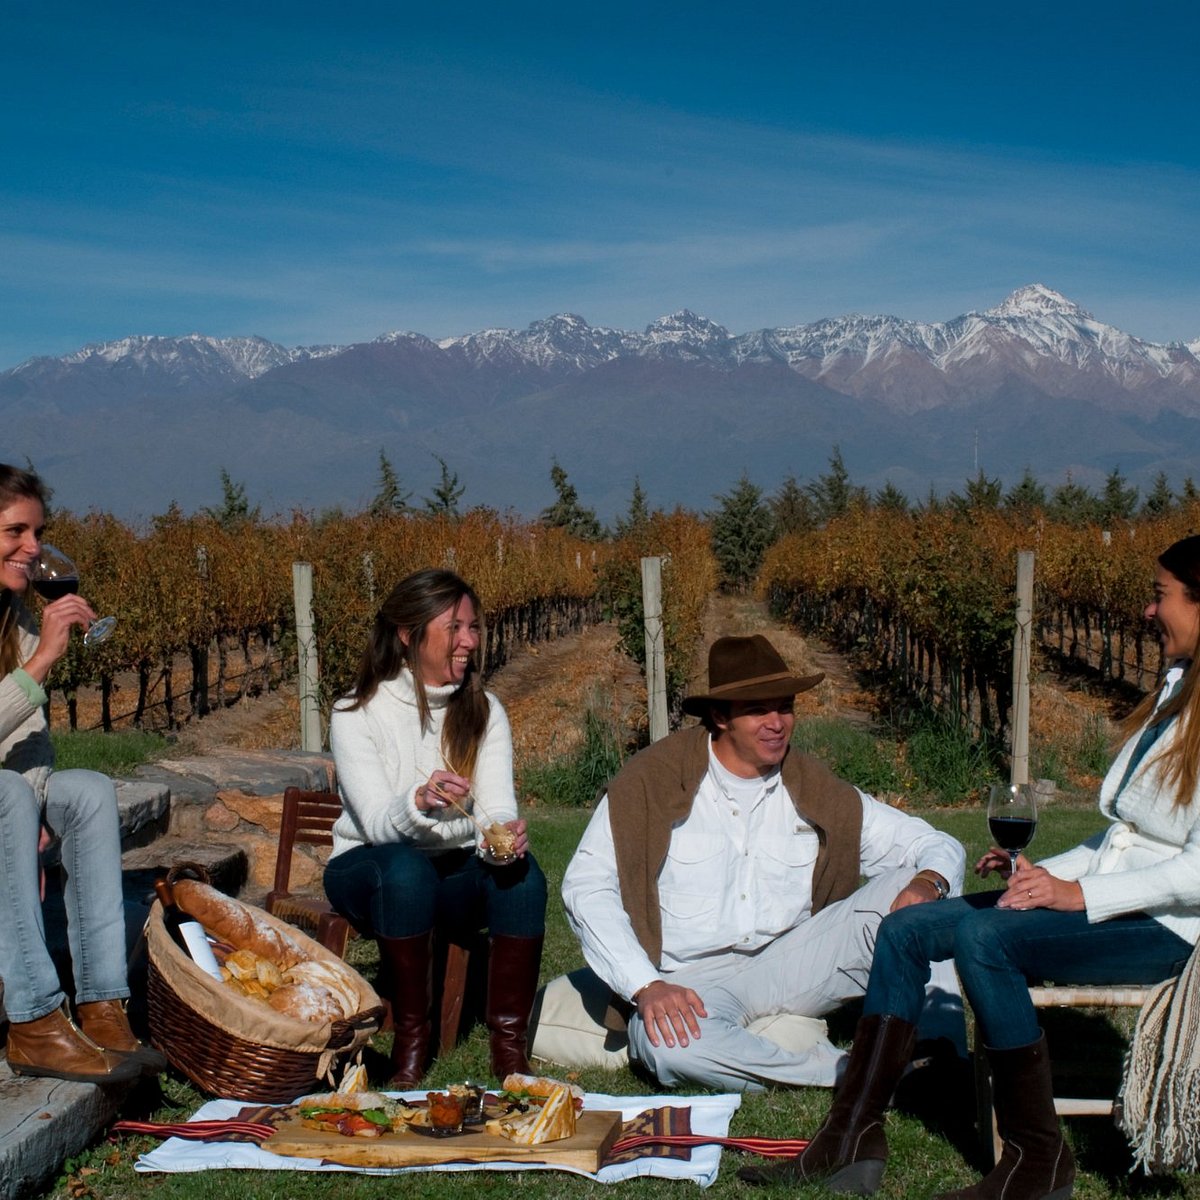 mendoza holidays - all you need to know before you go